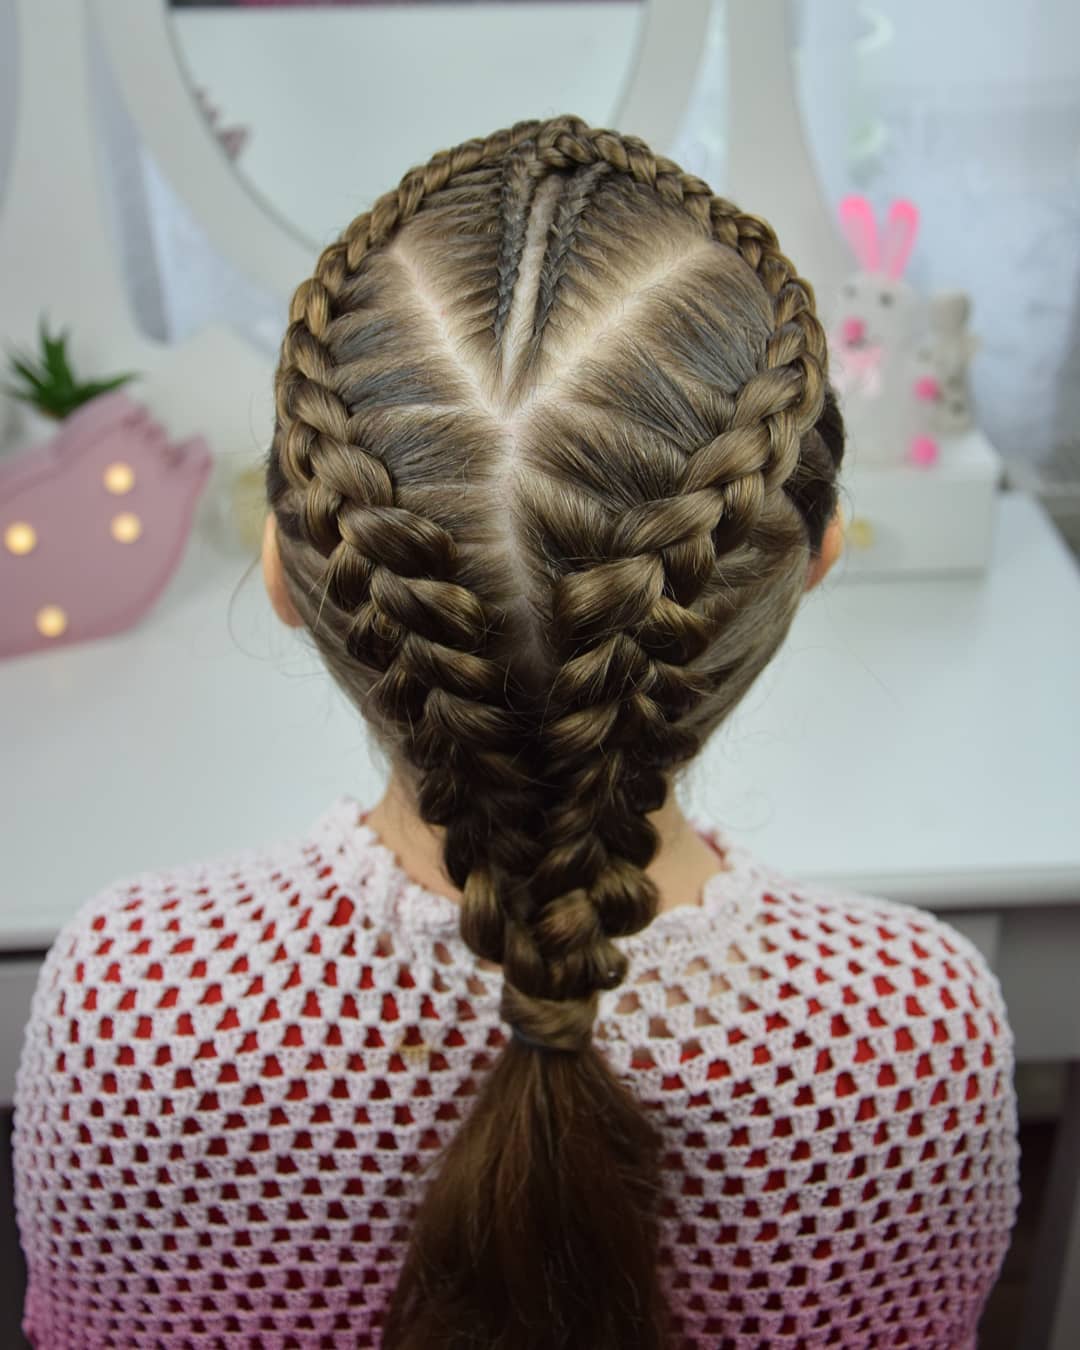 How to Dutch Braid Your Hair in 5 Easy Steps